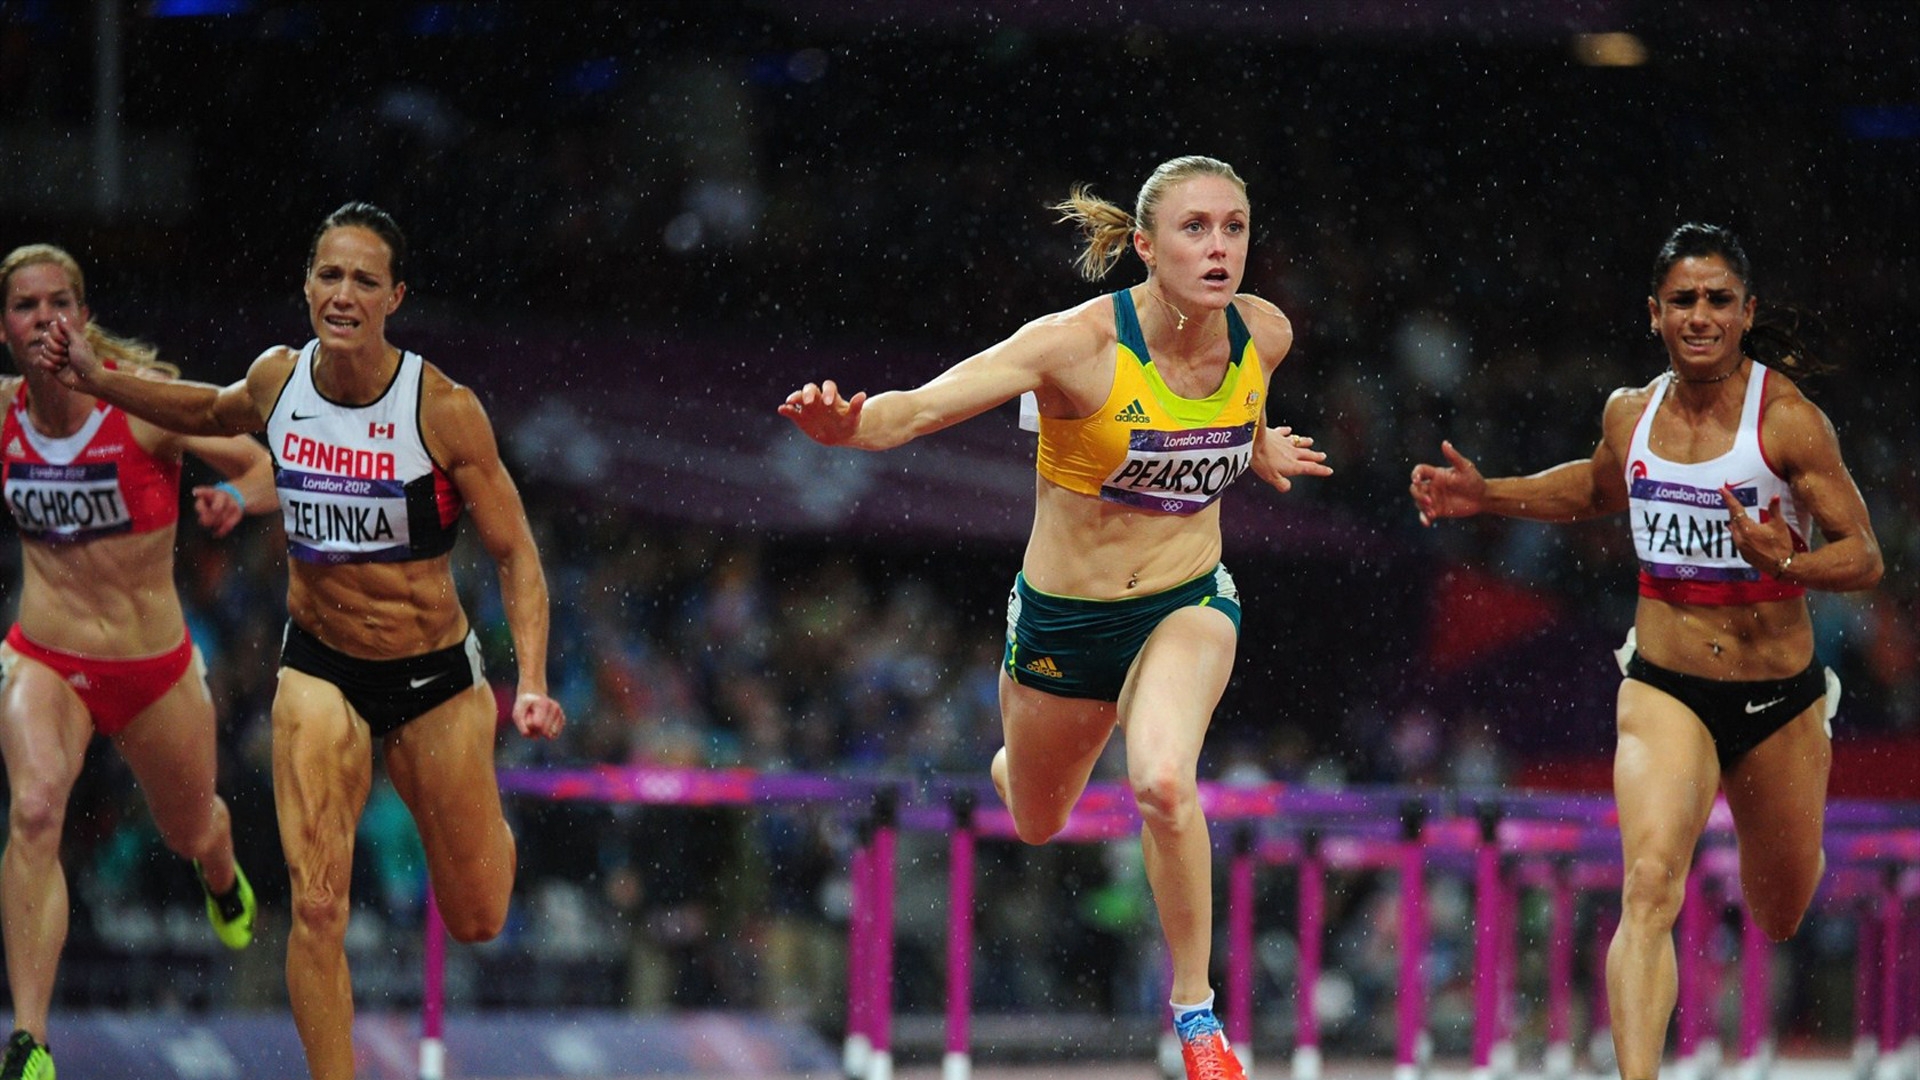 Sally Pearson for 1920 x 1080 HDTV 1080p resolution